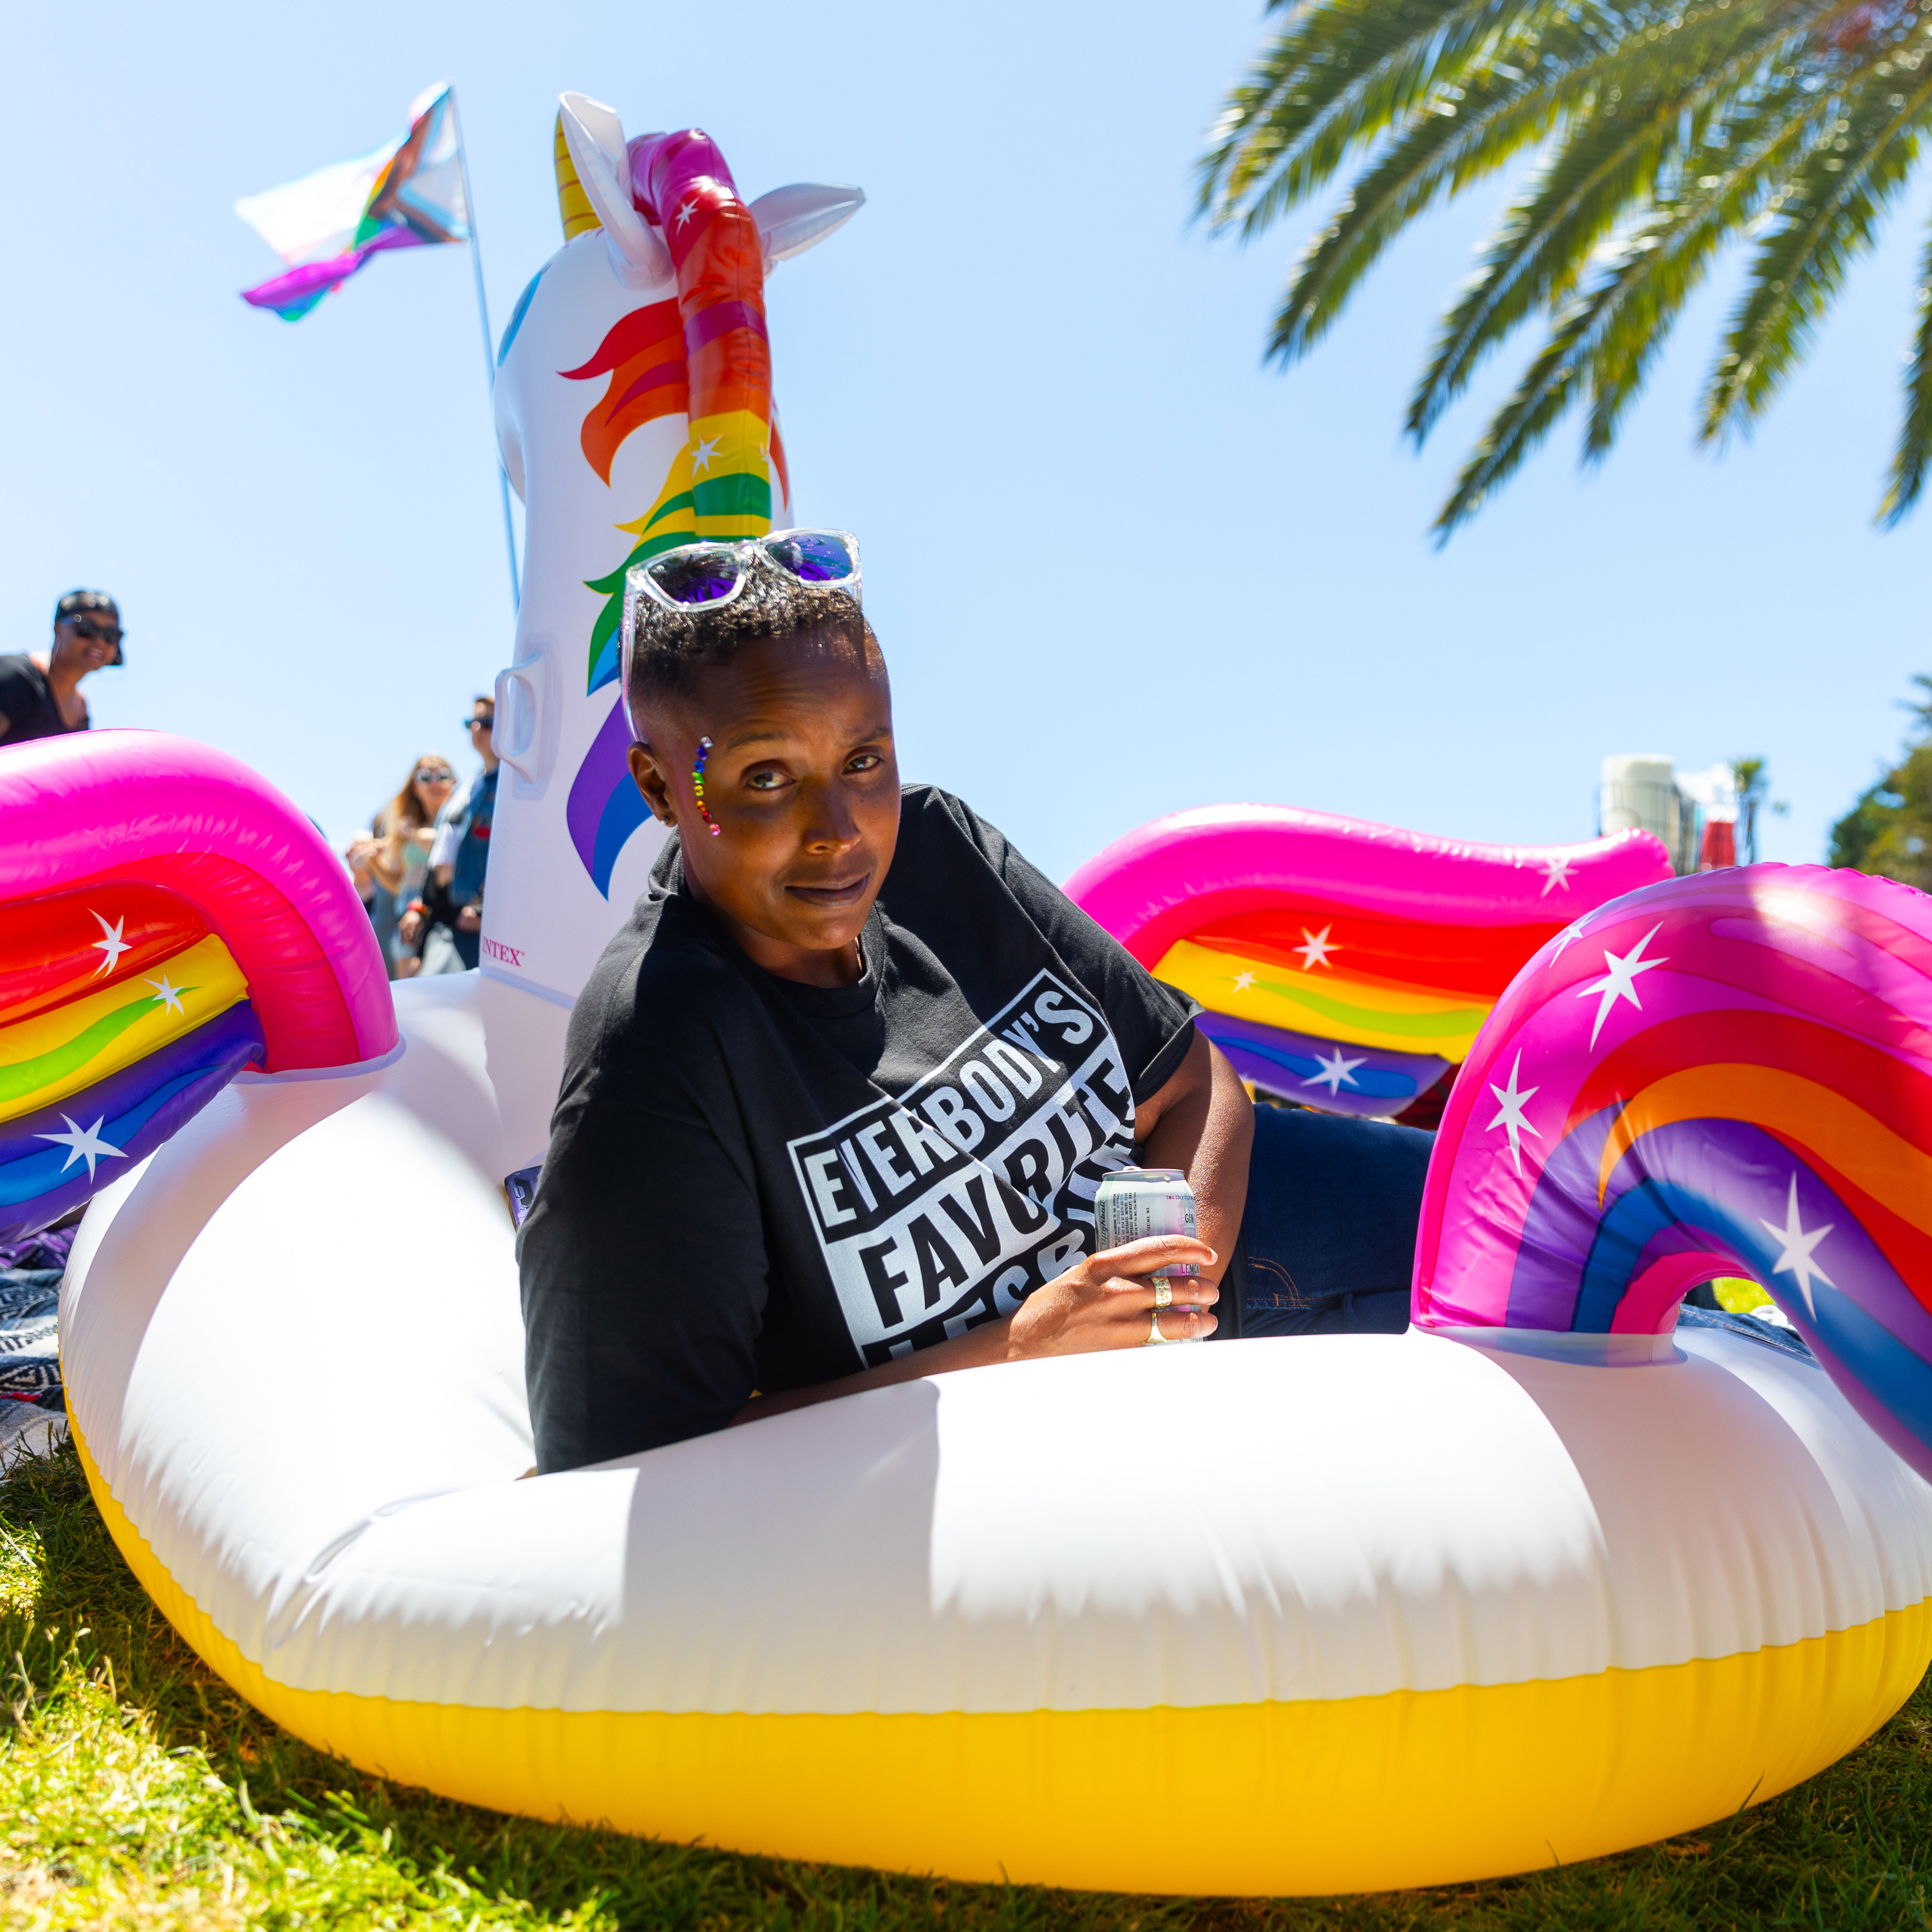 A person lounges on a colorful inflatable unicorn float, holding a drink. They wear a black shirt with white text and have purple glasses and glitter on their face.